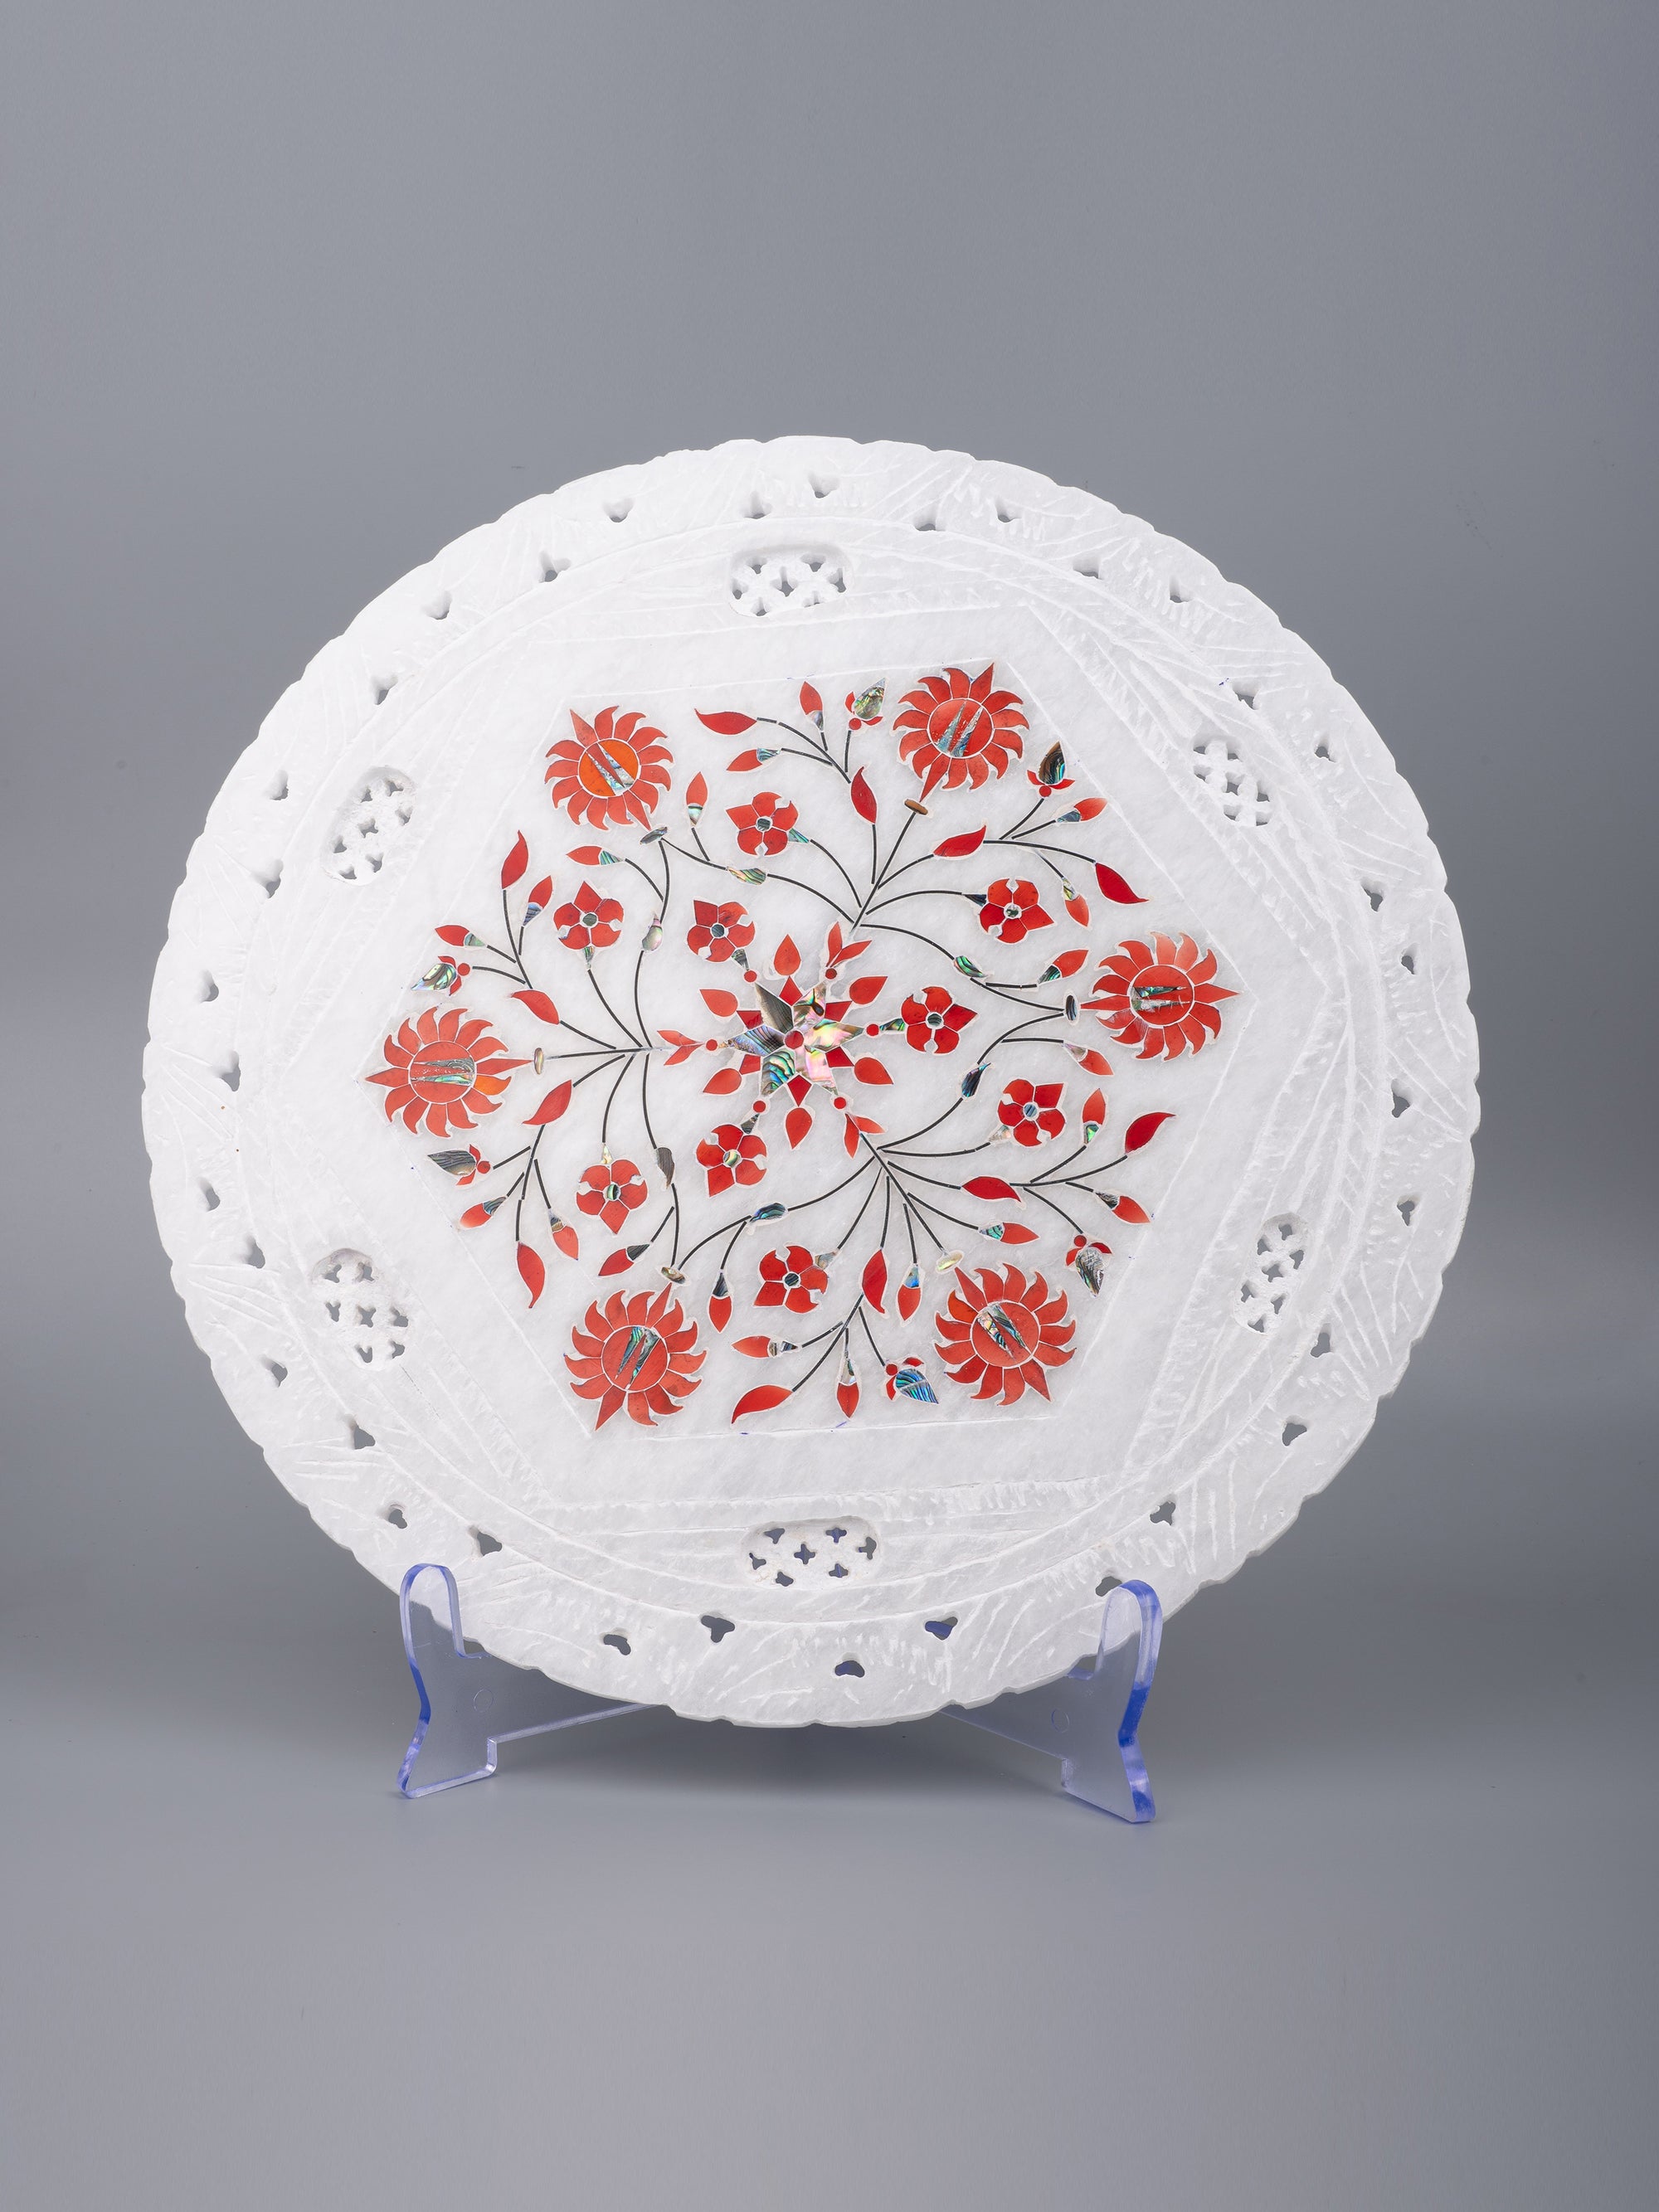 Marble décor plate with jali work and red floral inlay work - 12 inches - The Heritage Artifacts